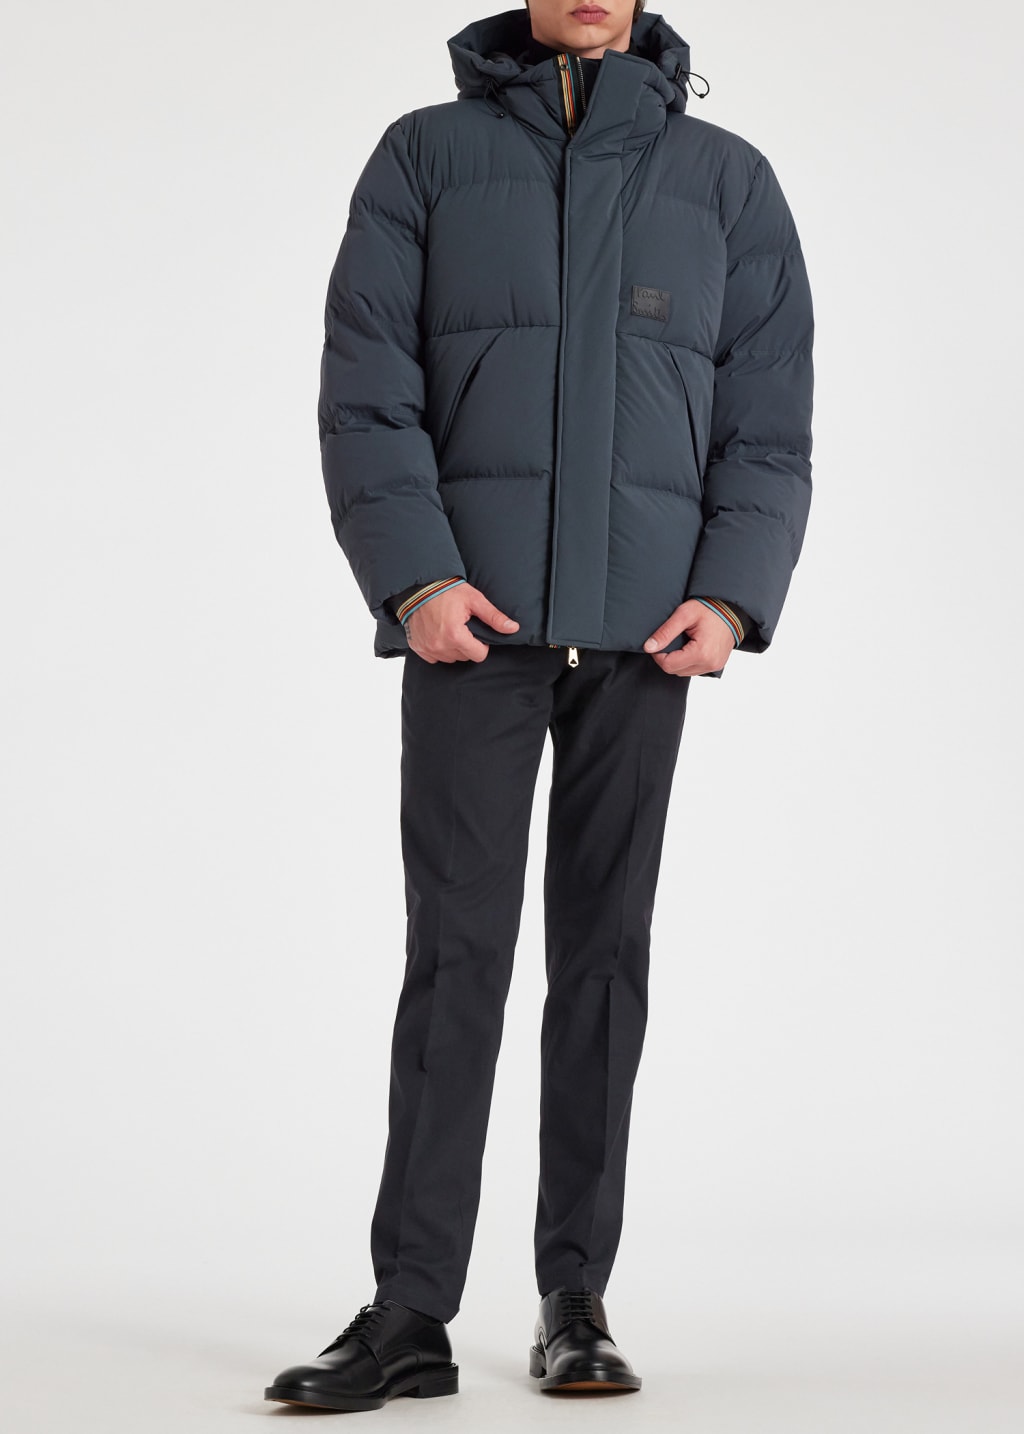 Model view - Washed Navy Hooded Down Coat